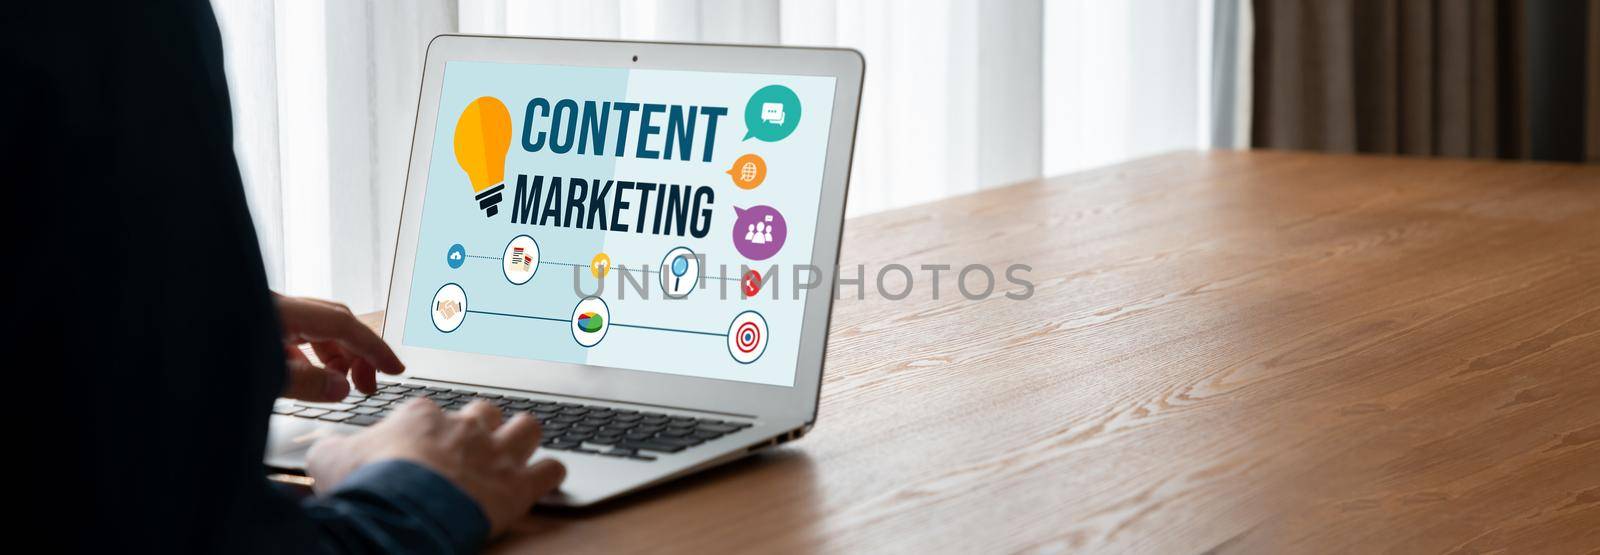 Content marketing for modish online business and e-commerce by biancoblue